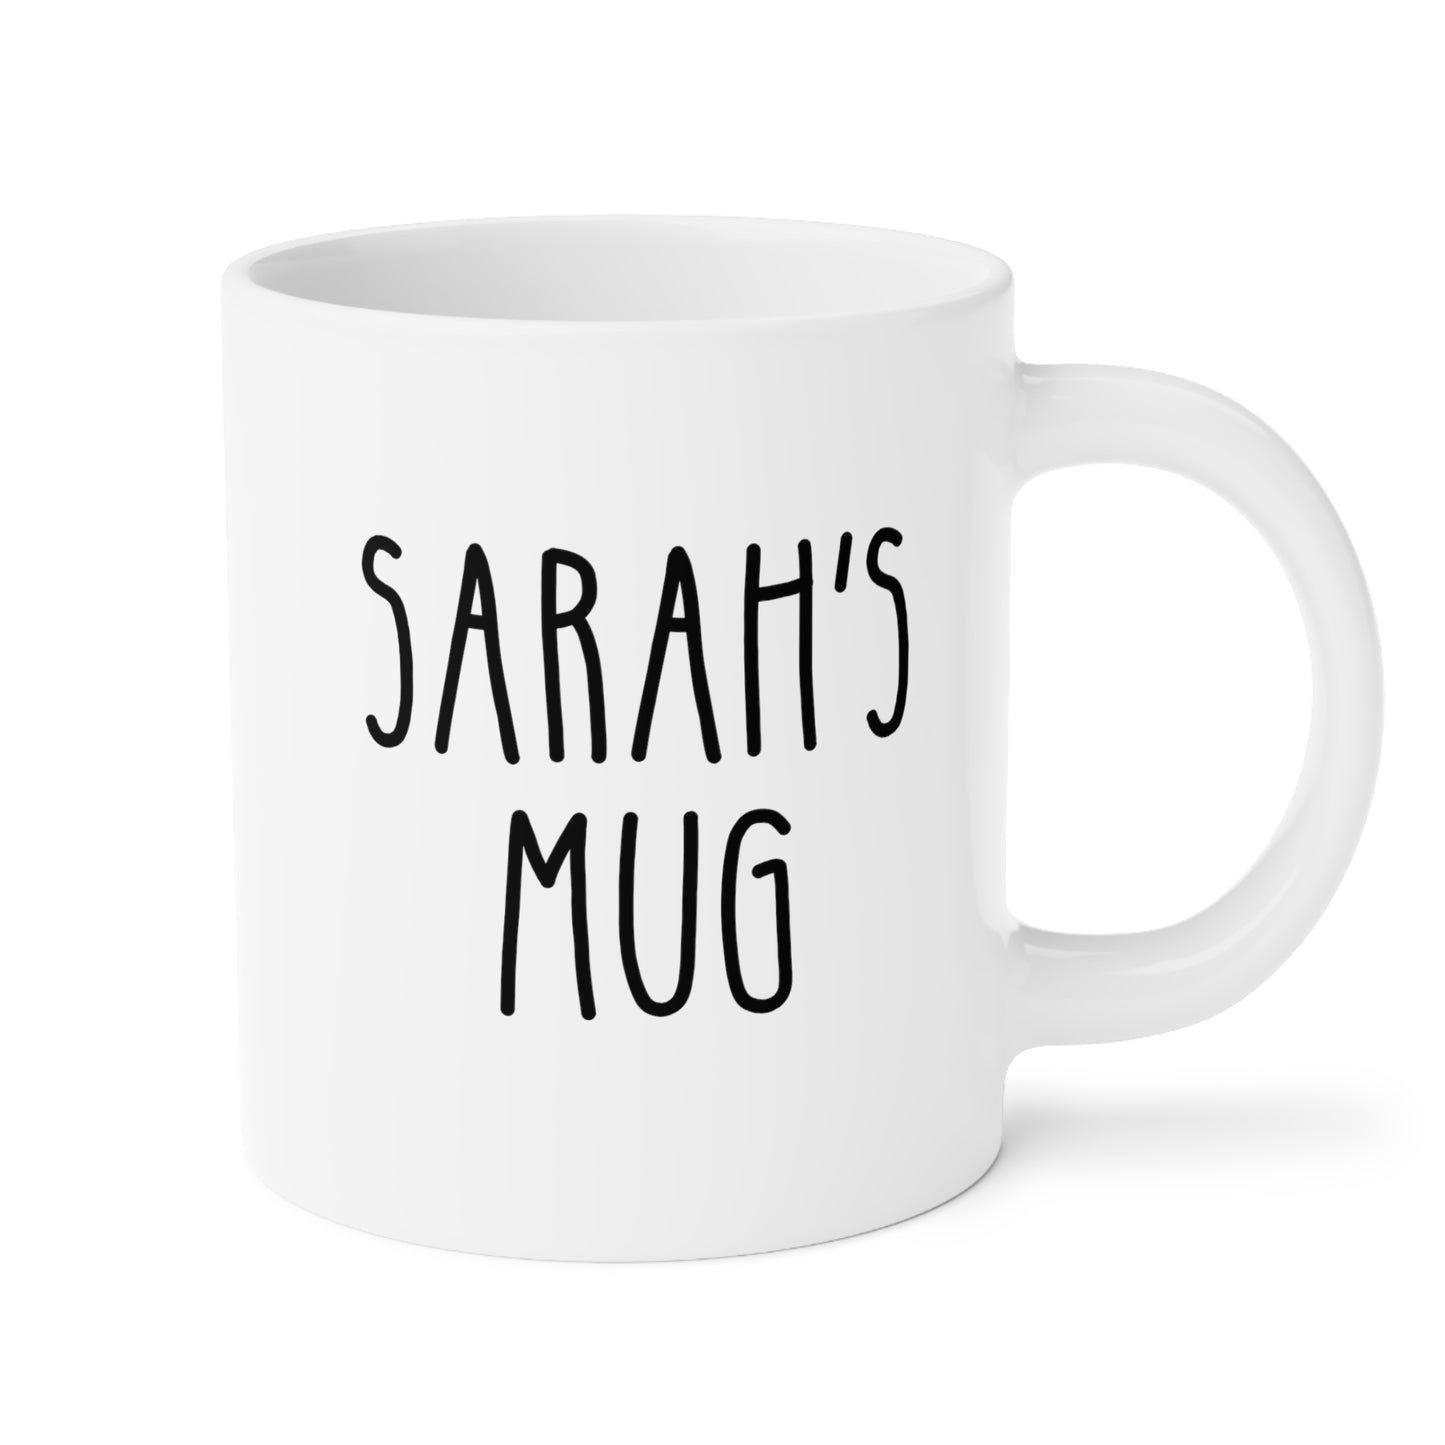 Personalized Name 20oz white funny large coffee mug gift for friend him her quote tall font custom customized cup waveywares wavey wares wavywares wavy wares